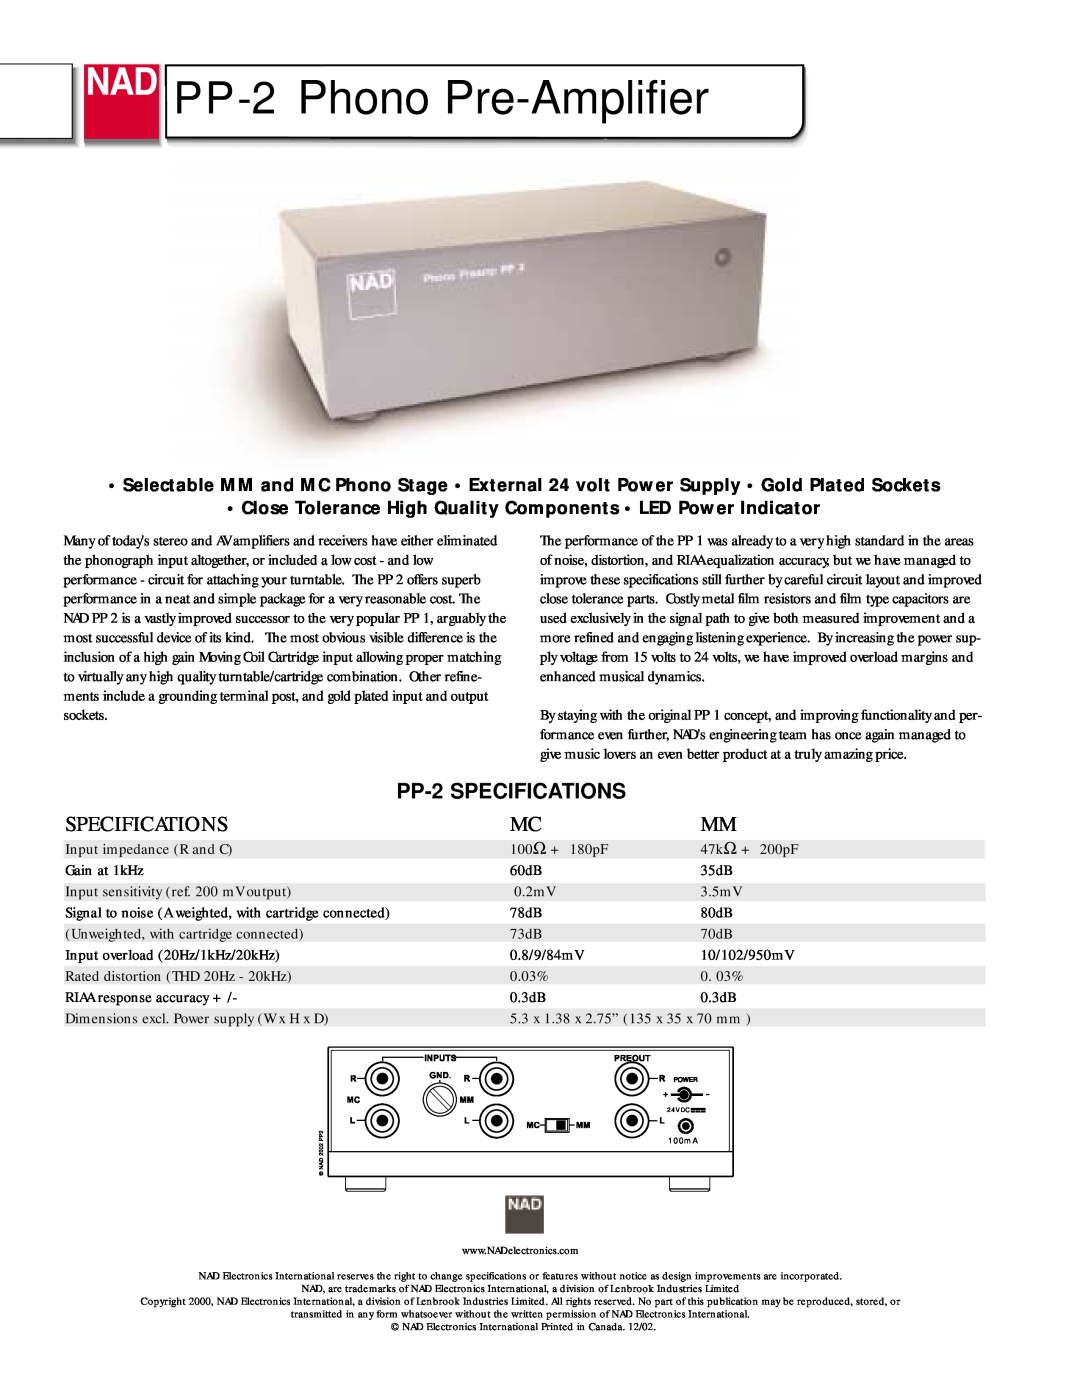 NAD specifications PP-2 Phono Pre-Amplifier, PP-2SPECIFICATIONS, Specifications 